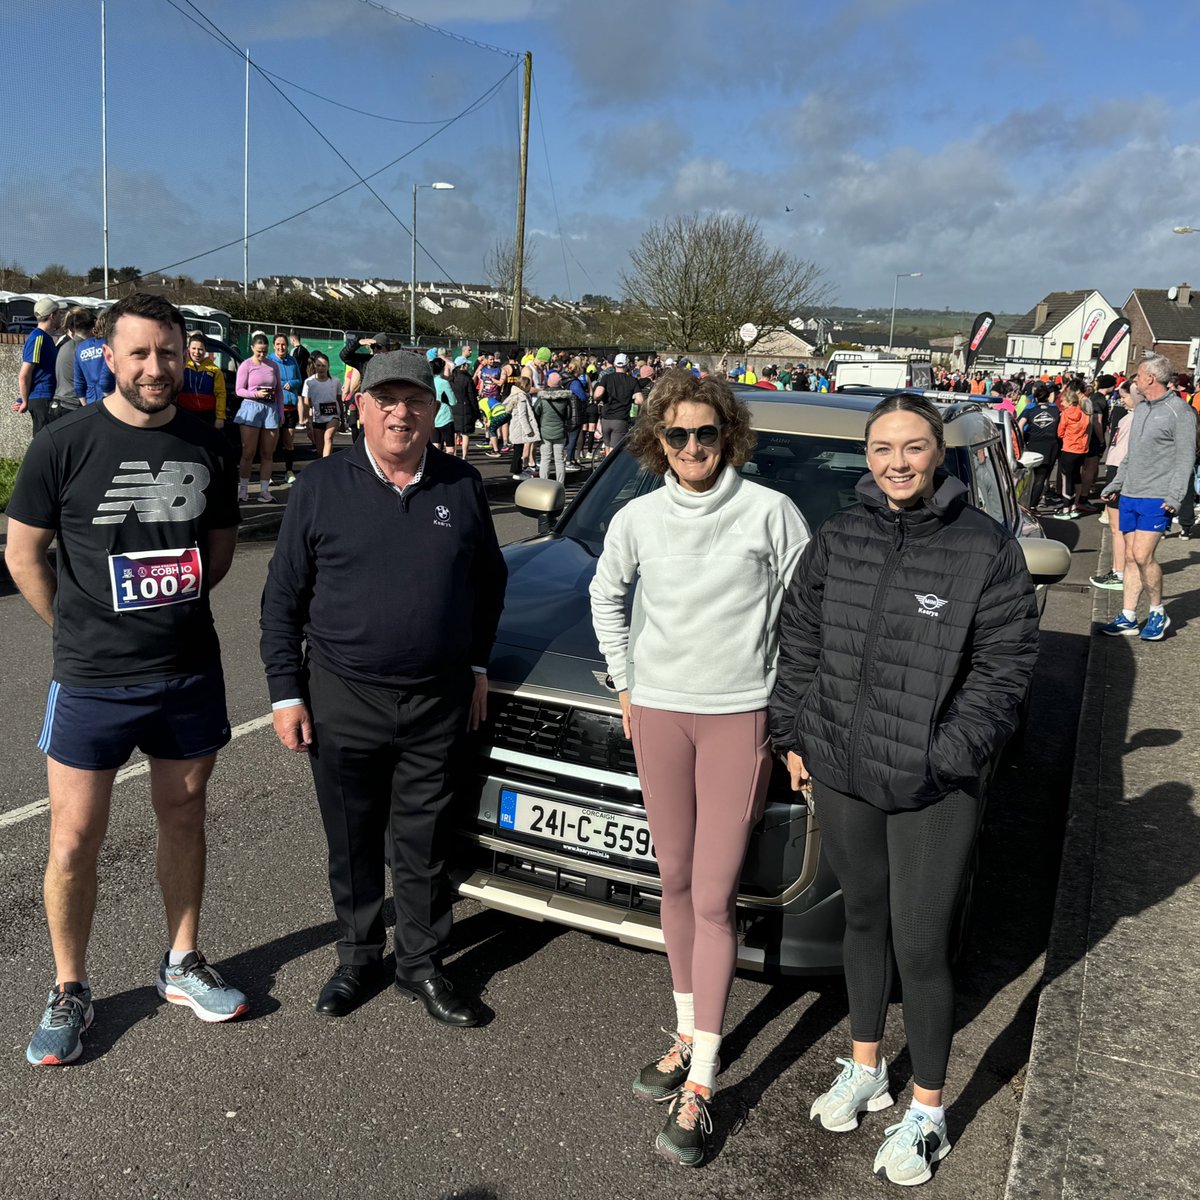 Kearys MINI proudly sponsor the Sonia O Sullivan 10 Mile Road race! What a morning in Cobh☀️ The All-New MINI Countryman was the lead car. Well done to all participants. #MINIBIGLOVEDAYS